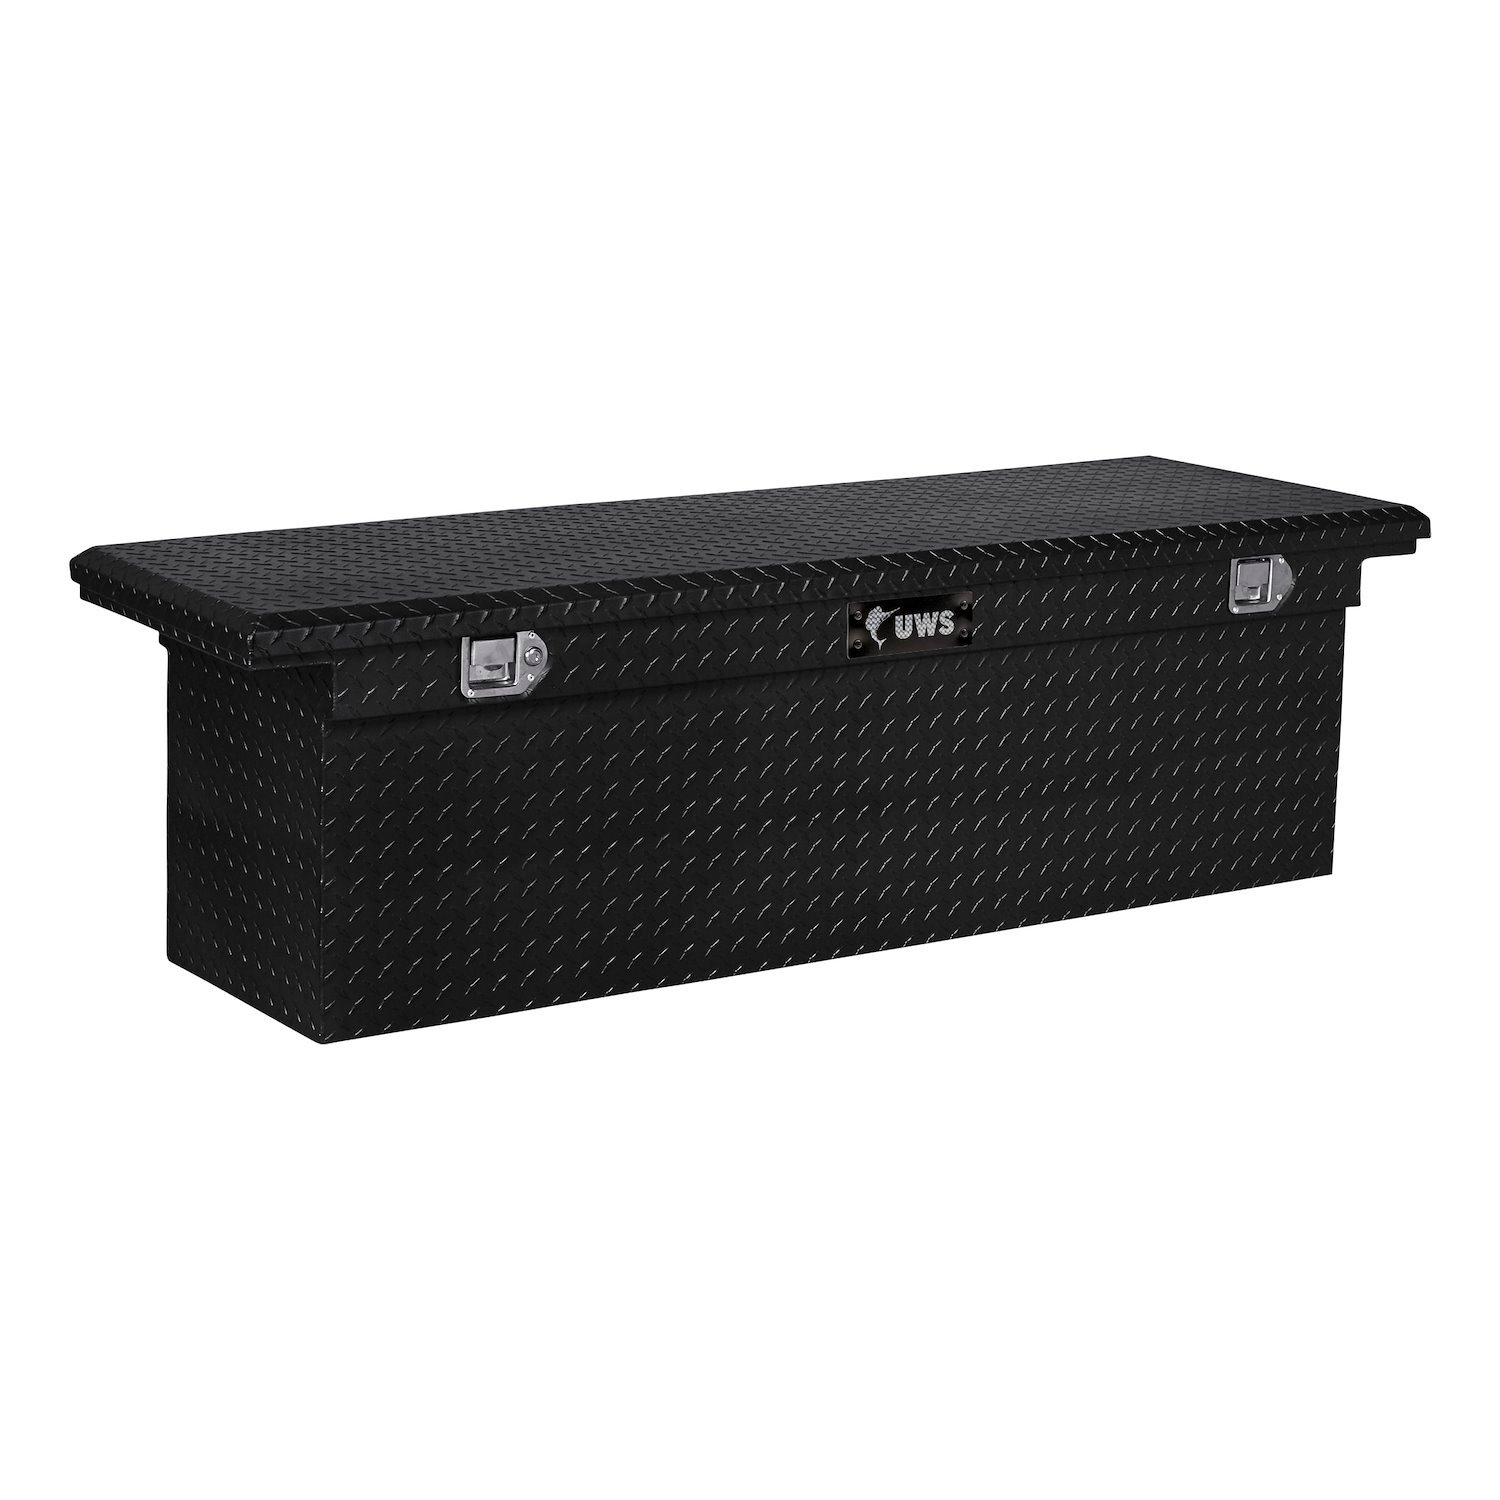 69 in. Deep Crossover Low-Profile Truck Tool Box